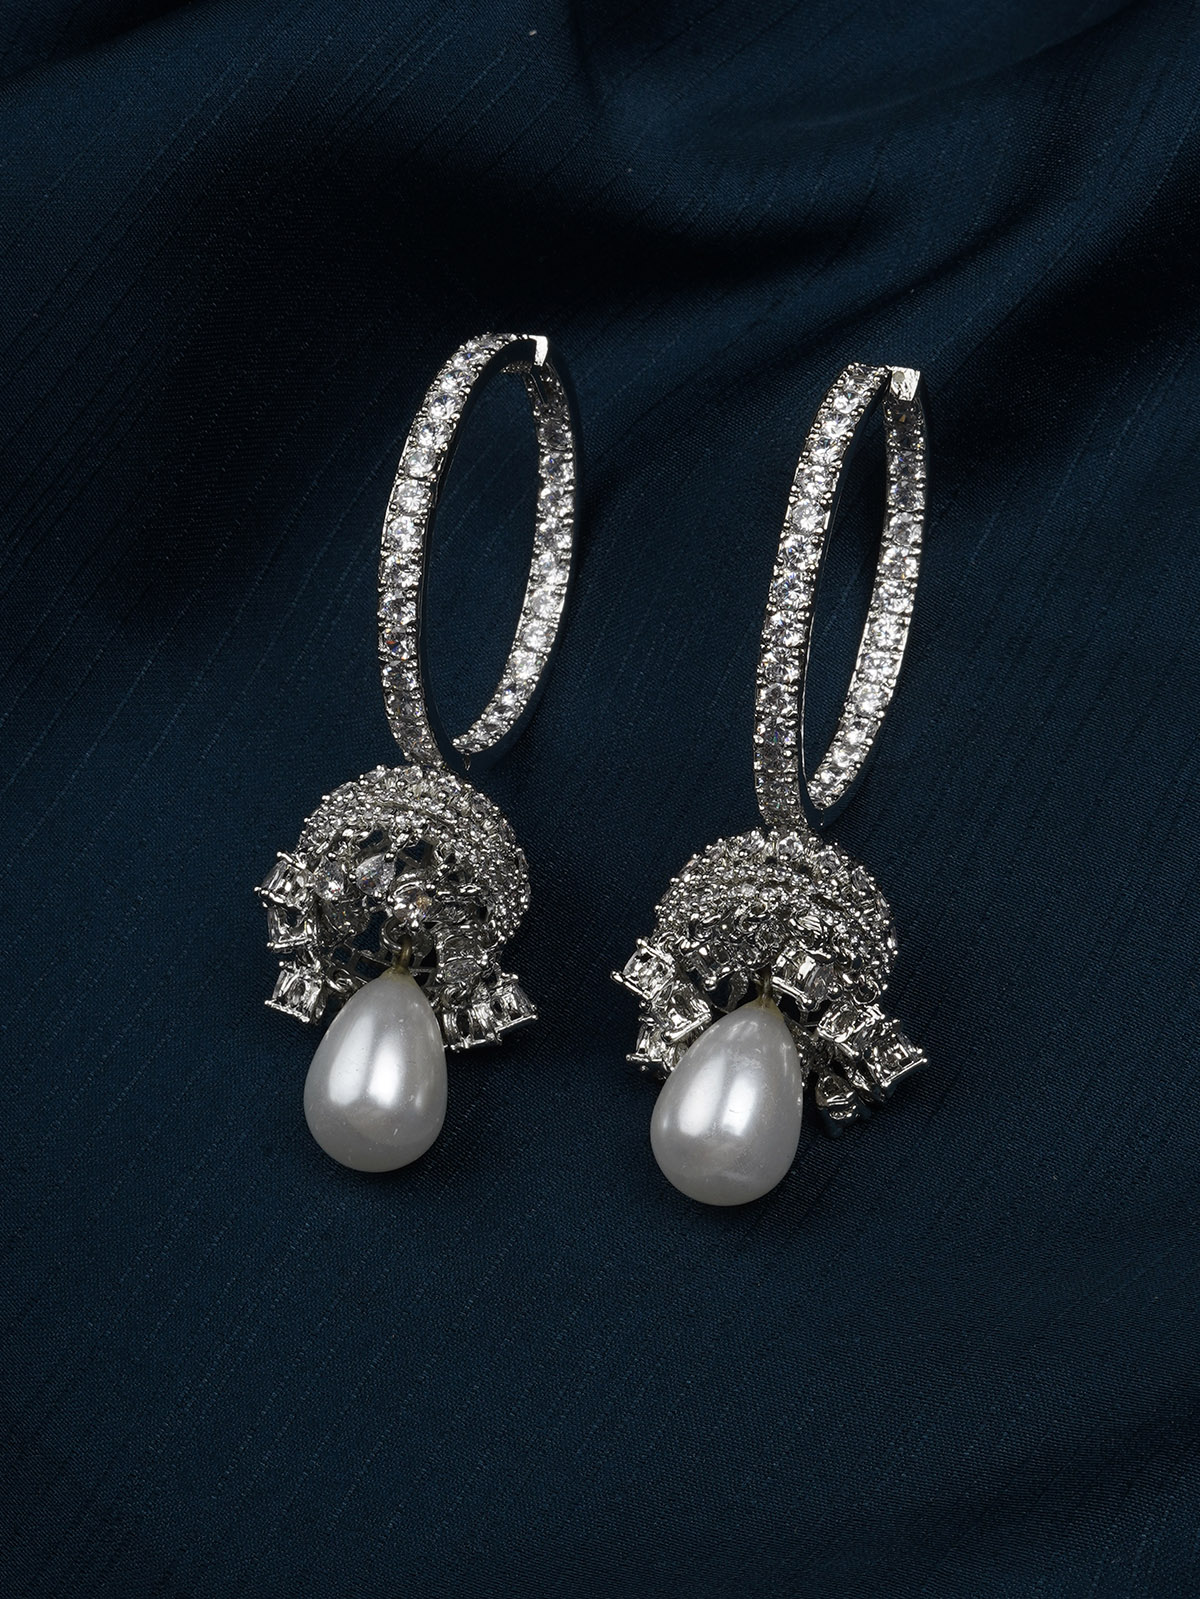 CZEAR522 - White Color Silver Plated Faux Diamond Earrings